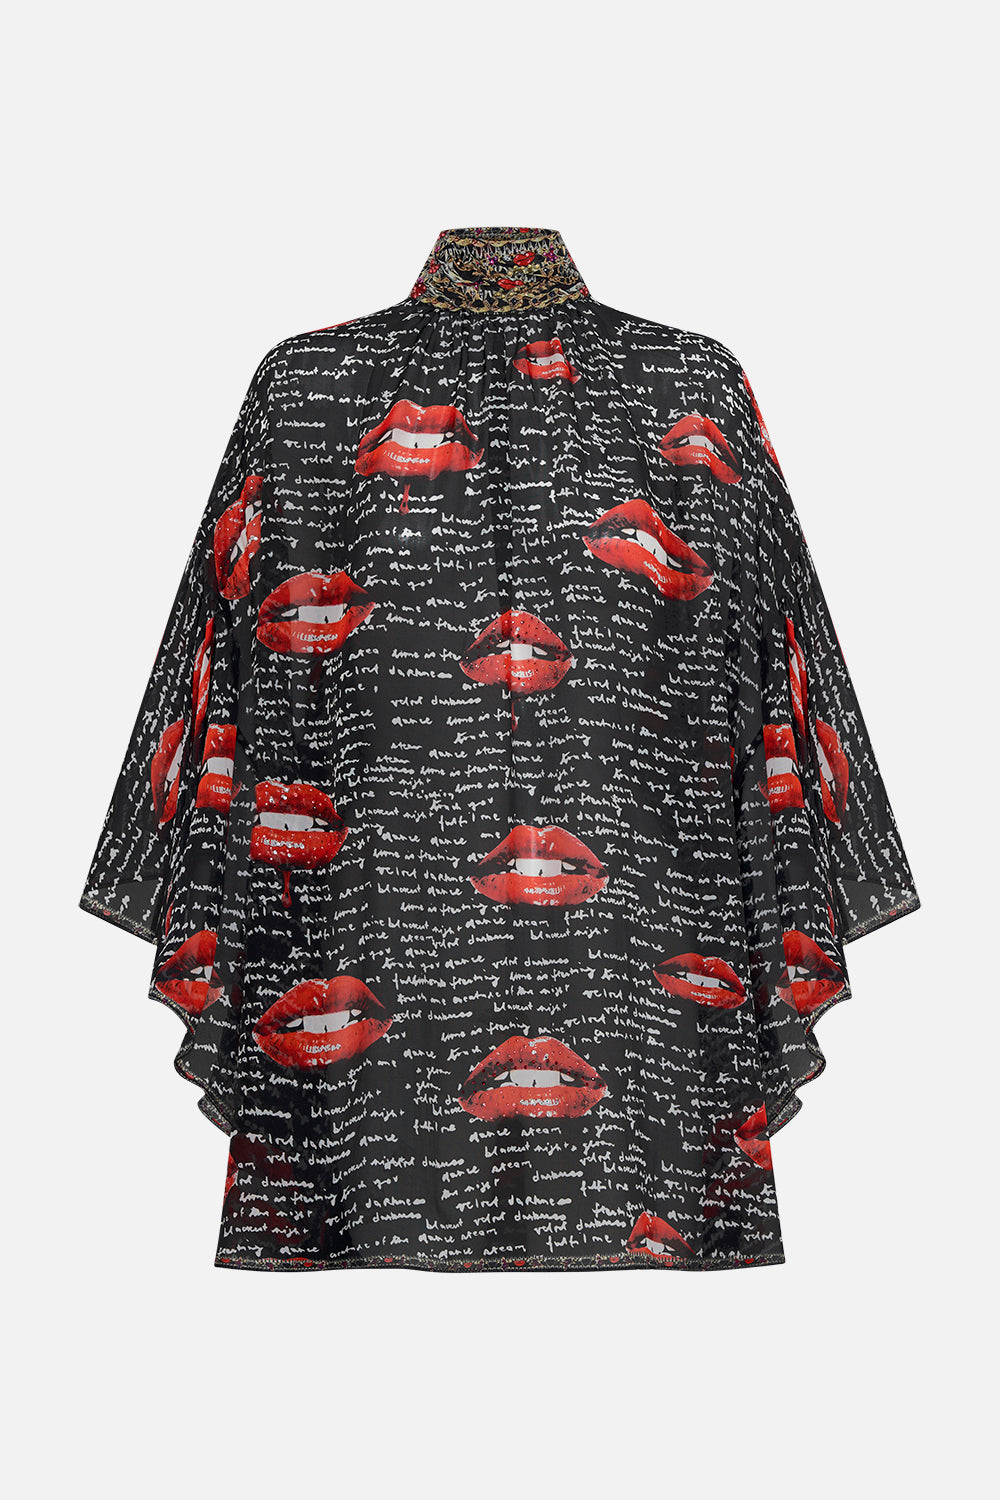 Product view of CAMILLA black silk blouse in Chaos Magic print 